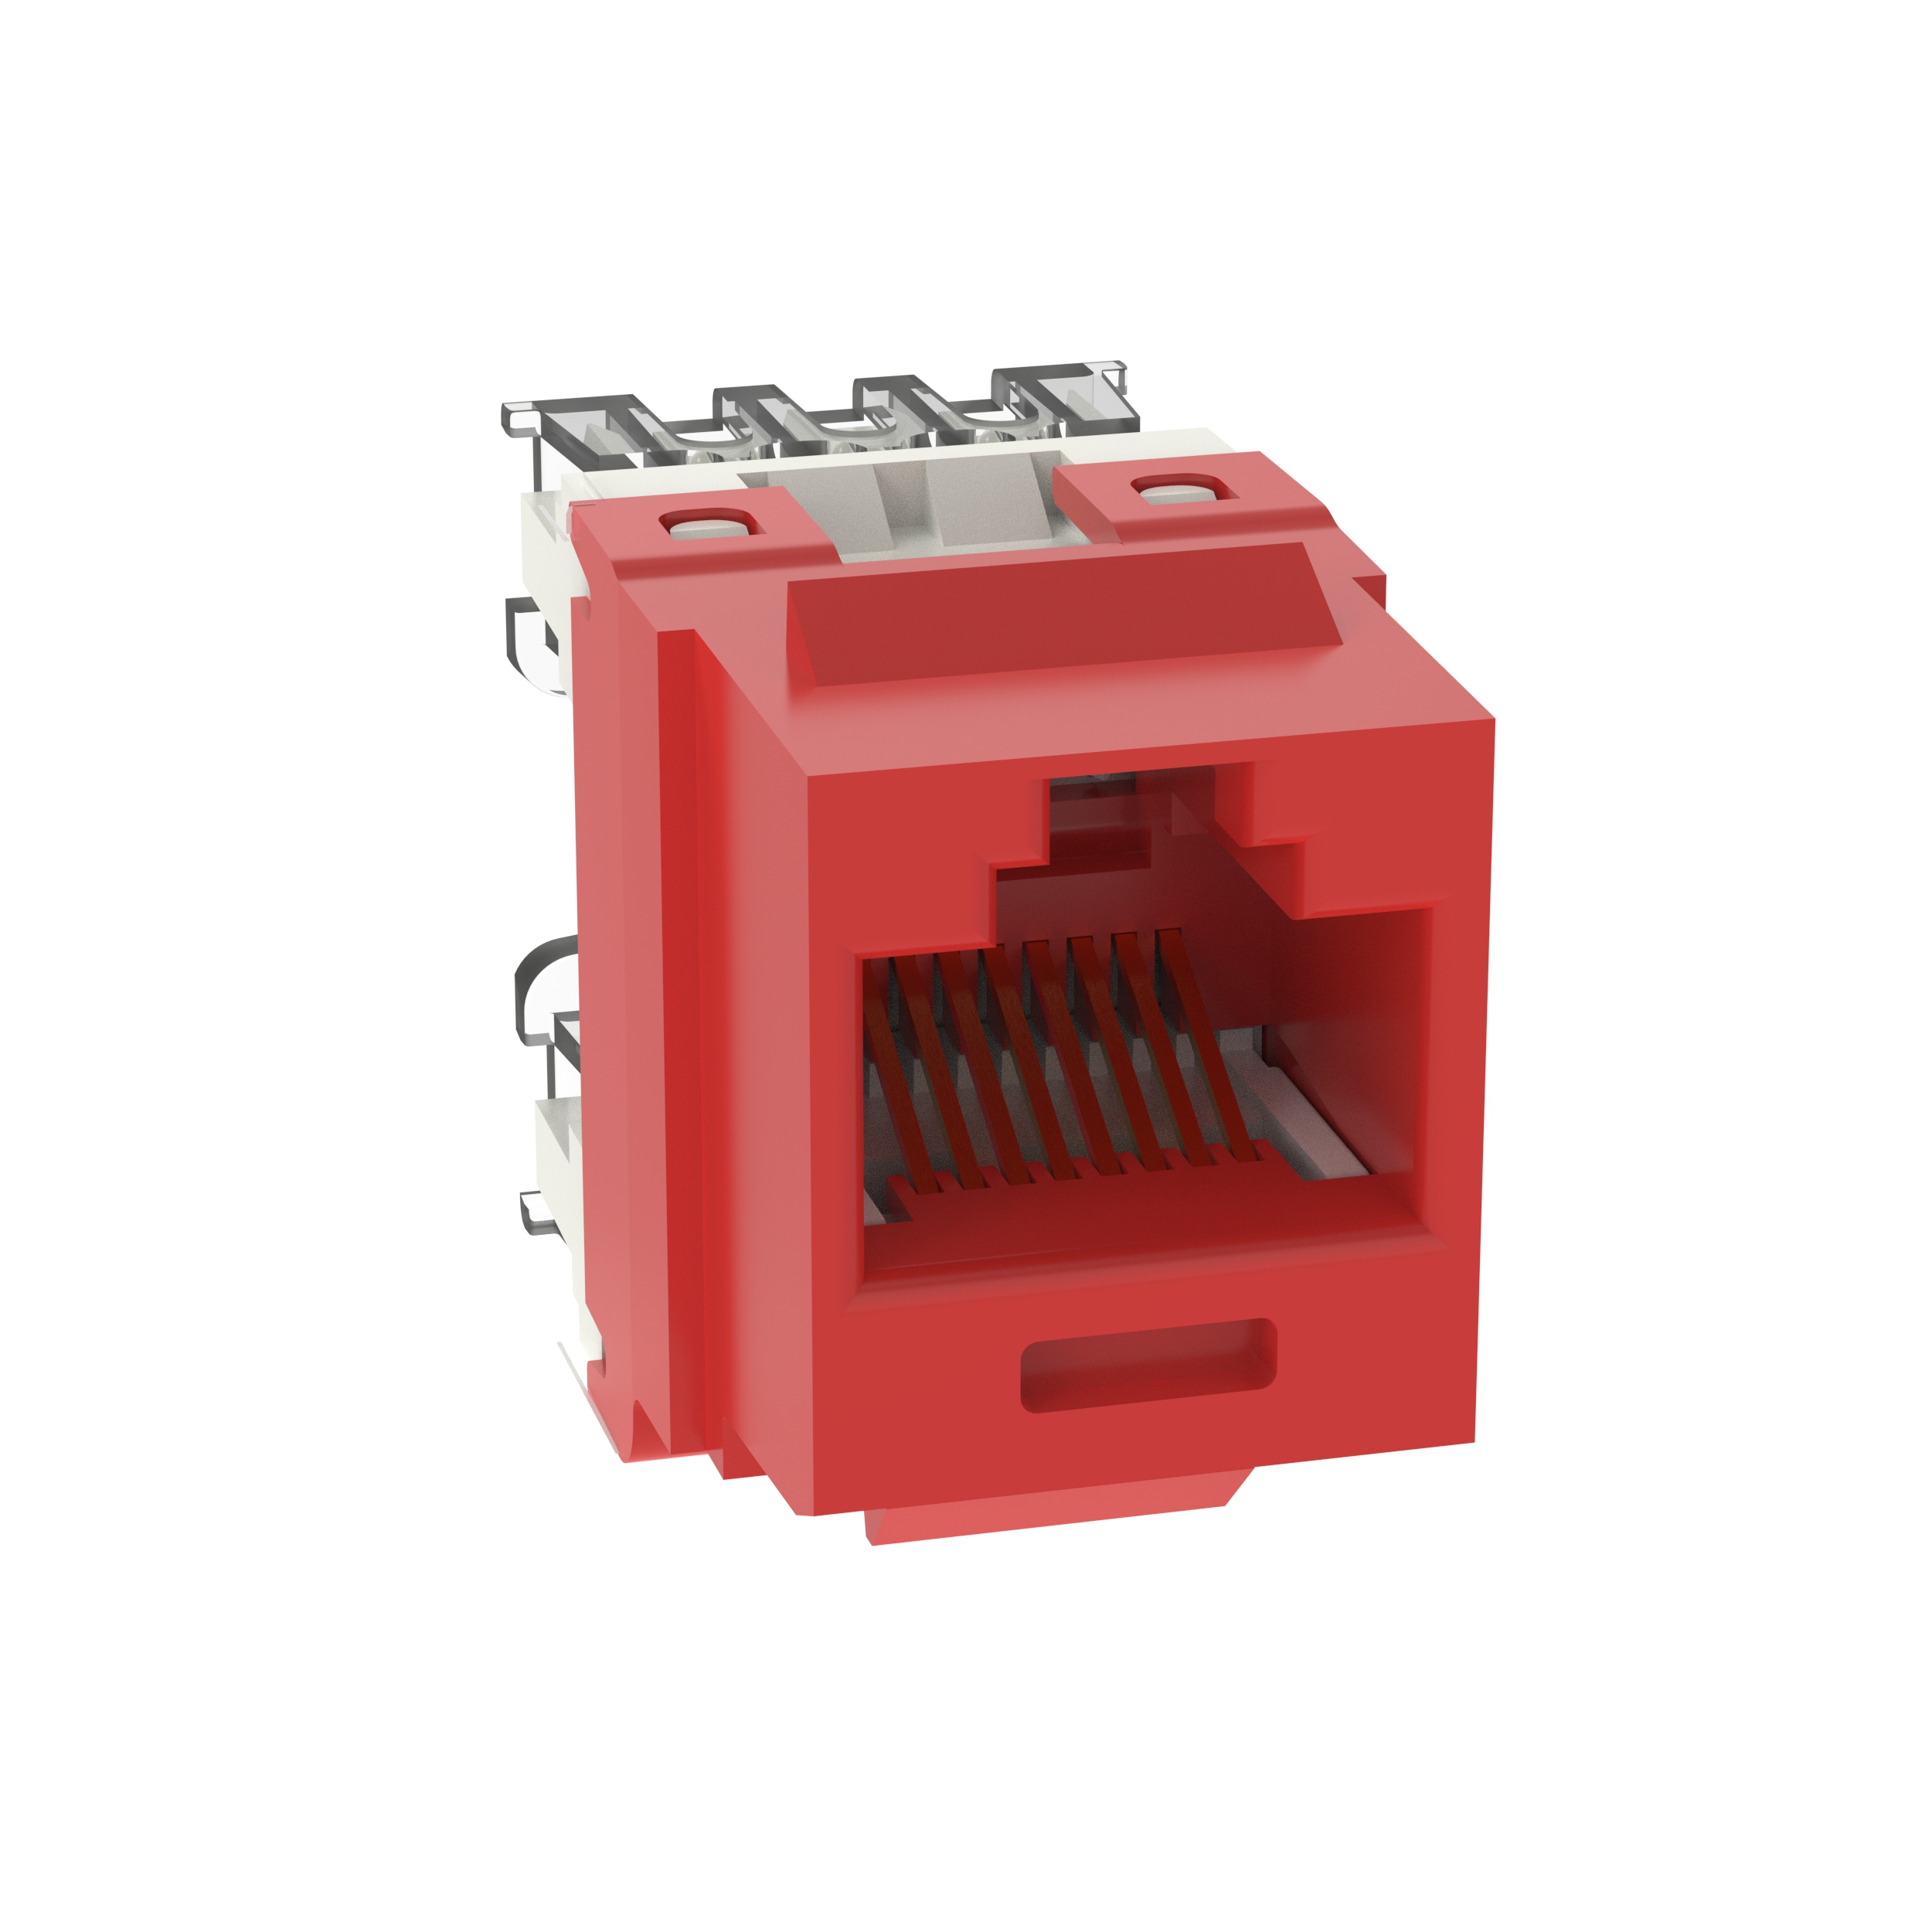 NetKey Cat 6 Punchdown Jack, Red - Pack